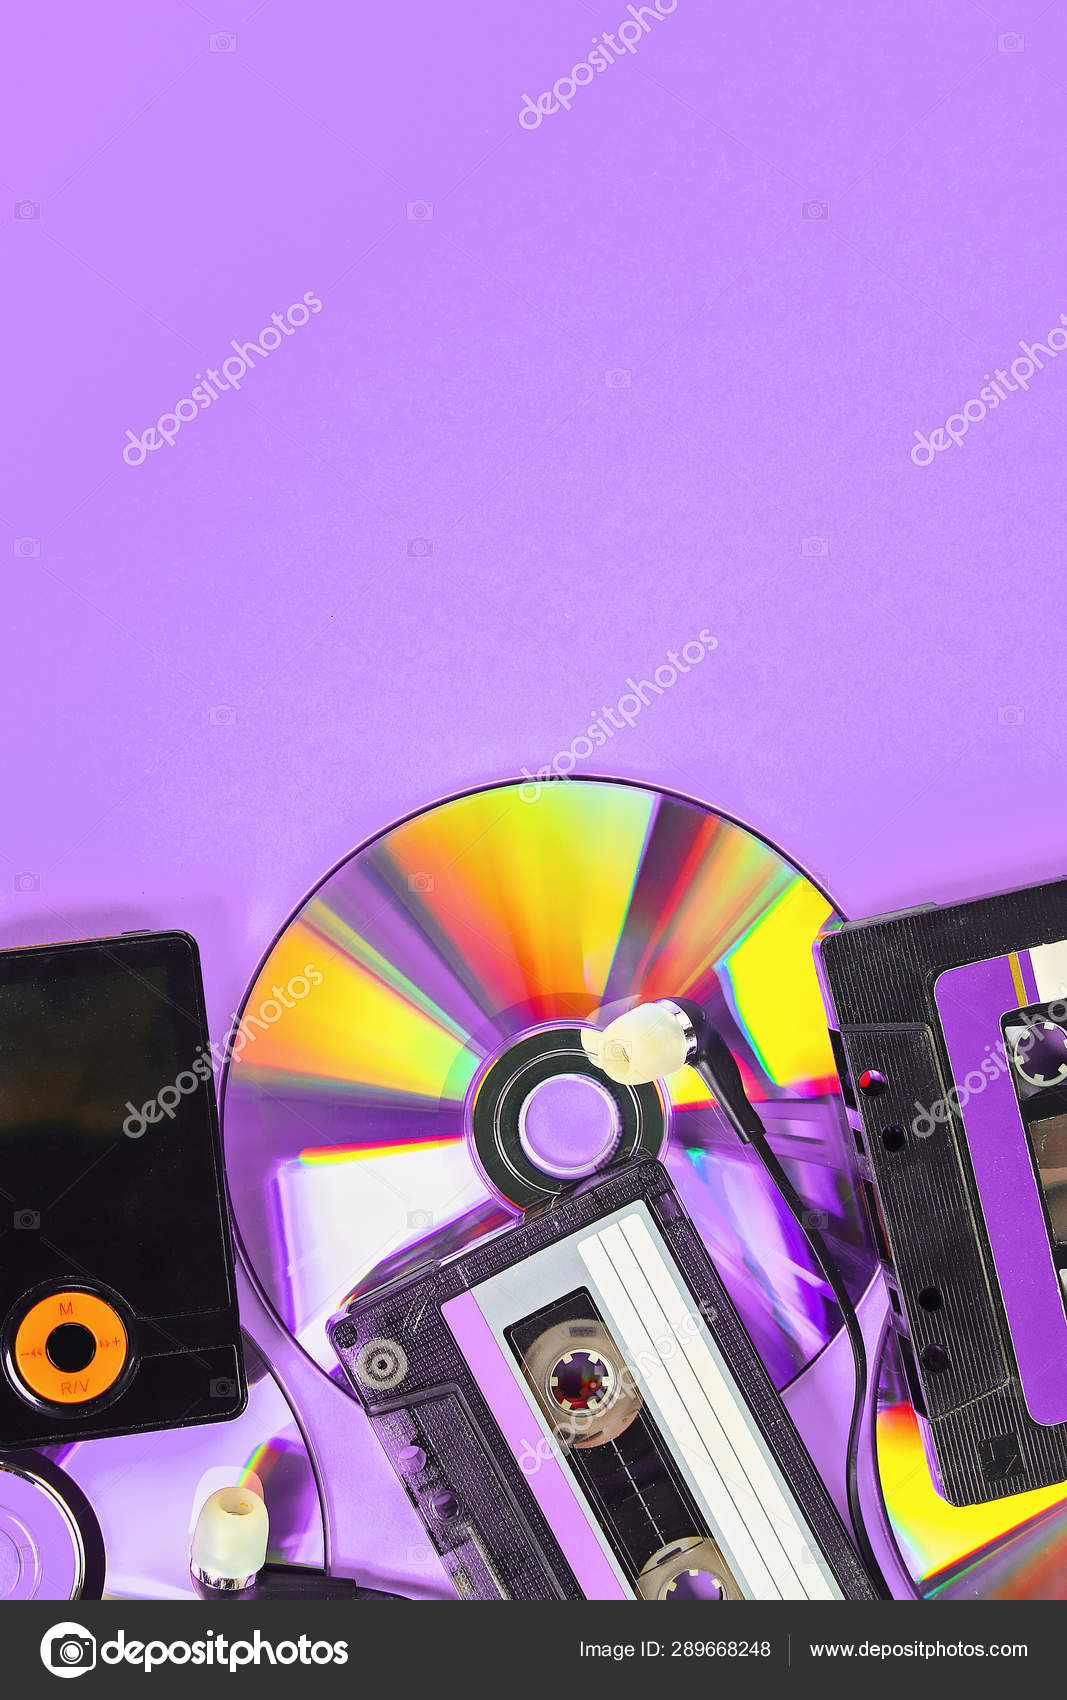 The concept of evolution music. Cassette, CD-disk, mp3 player. Vintage and  modernity. Music support. Stock Photo by ©detry.yandex.ru 289668248